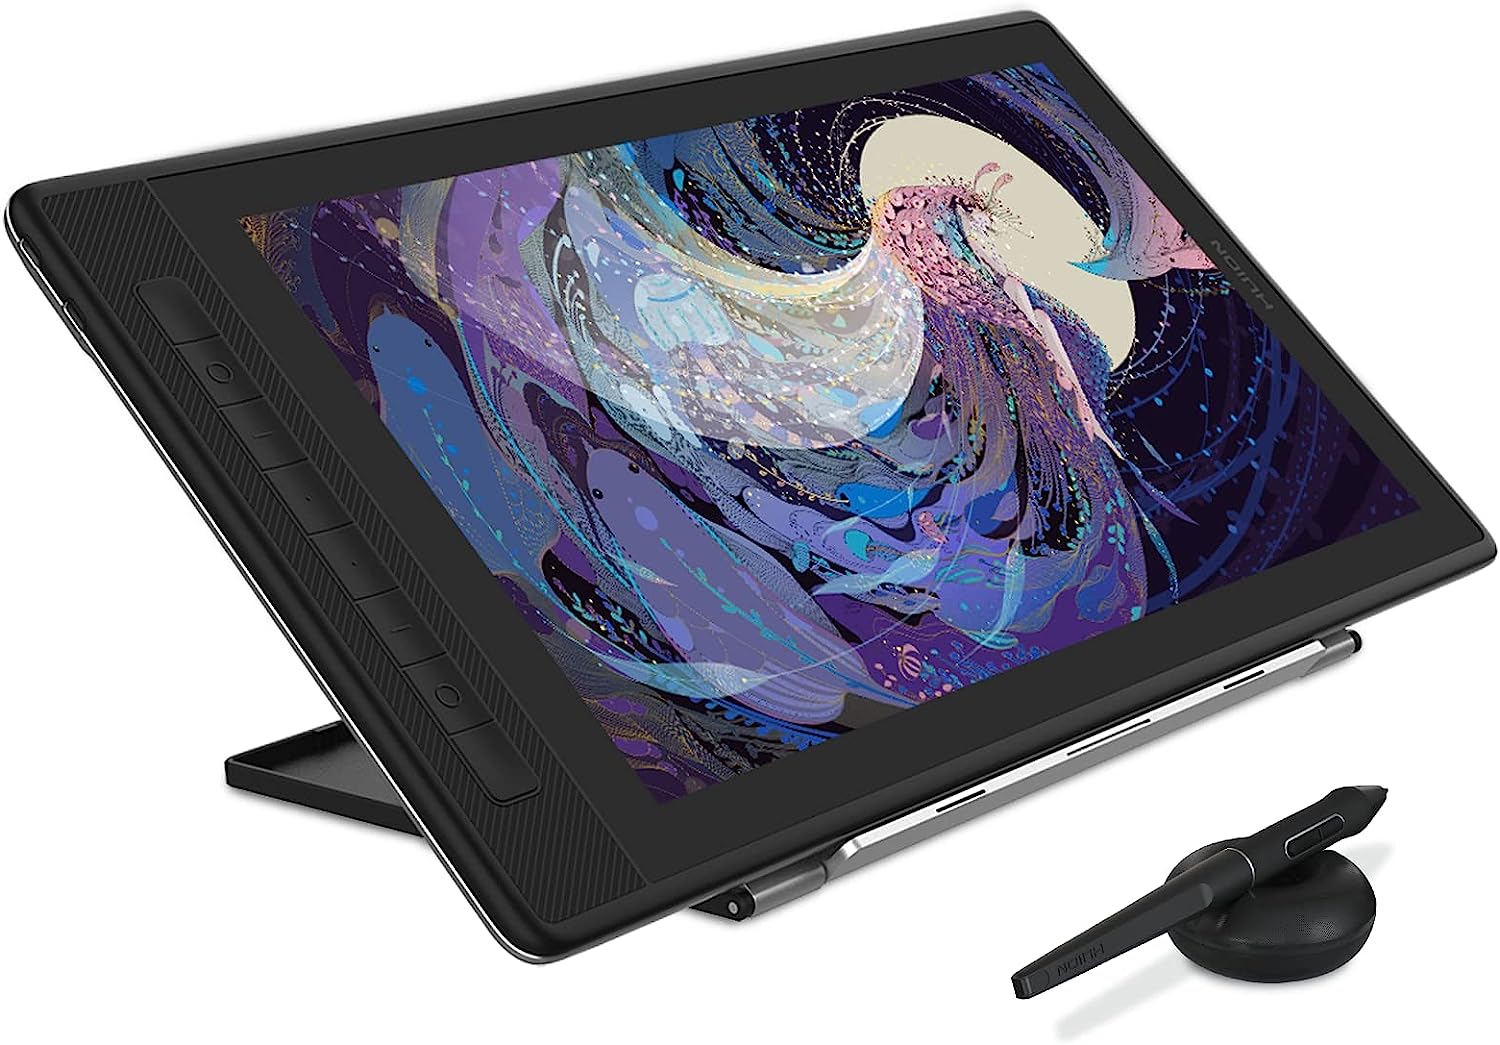 2022 HUION KAMVAS Pro 16 2.5K QHD Drawing Tablet with [...]